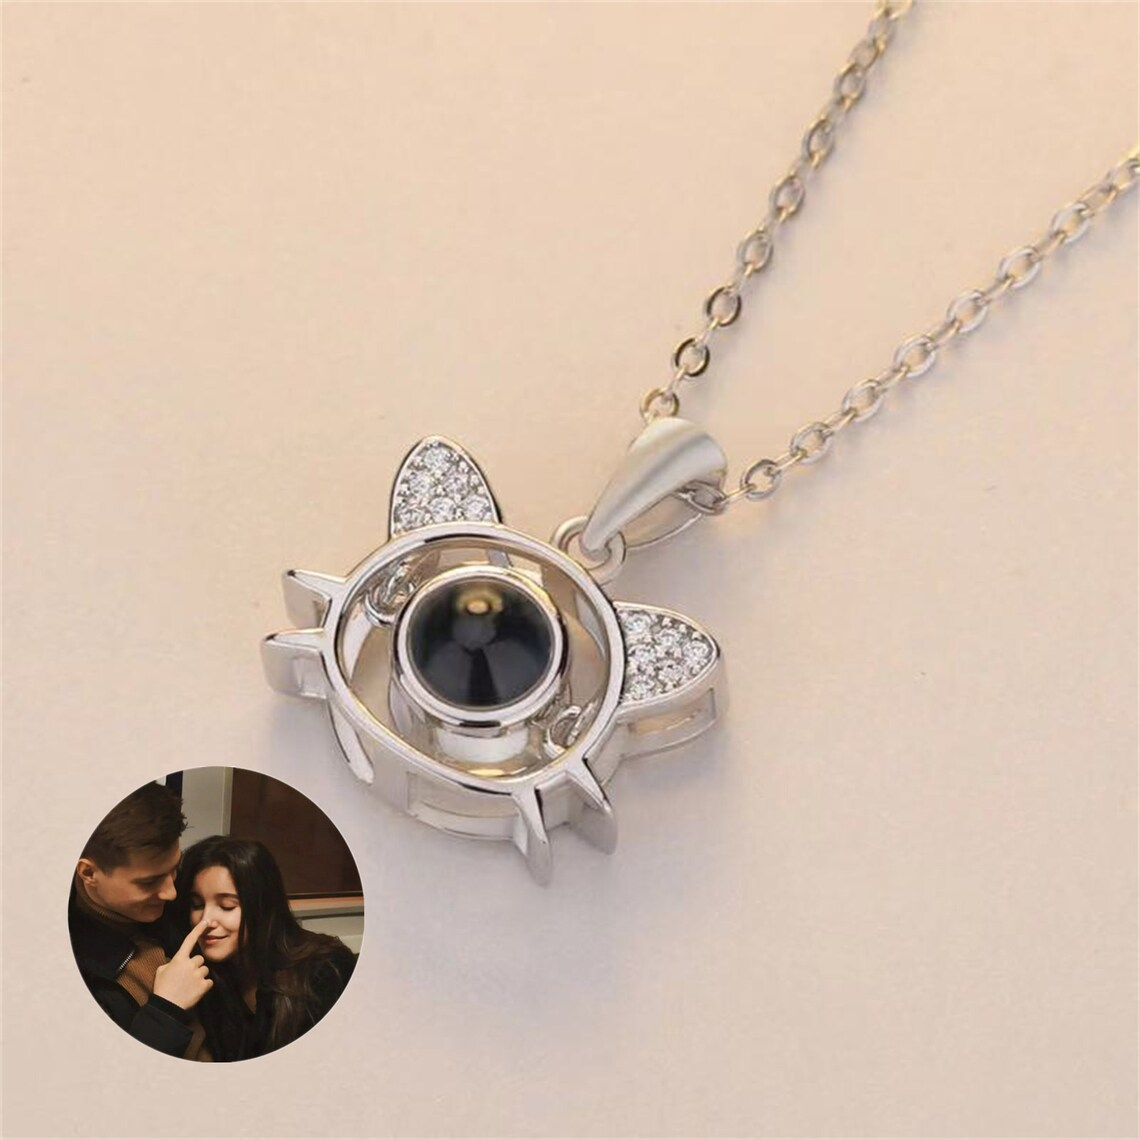 Peraonalized Cat Shape Projection Photo Pendant Necklace With Picture Inside